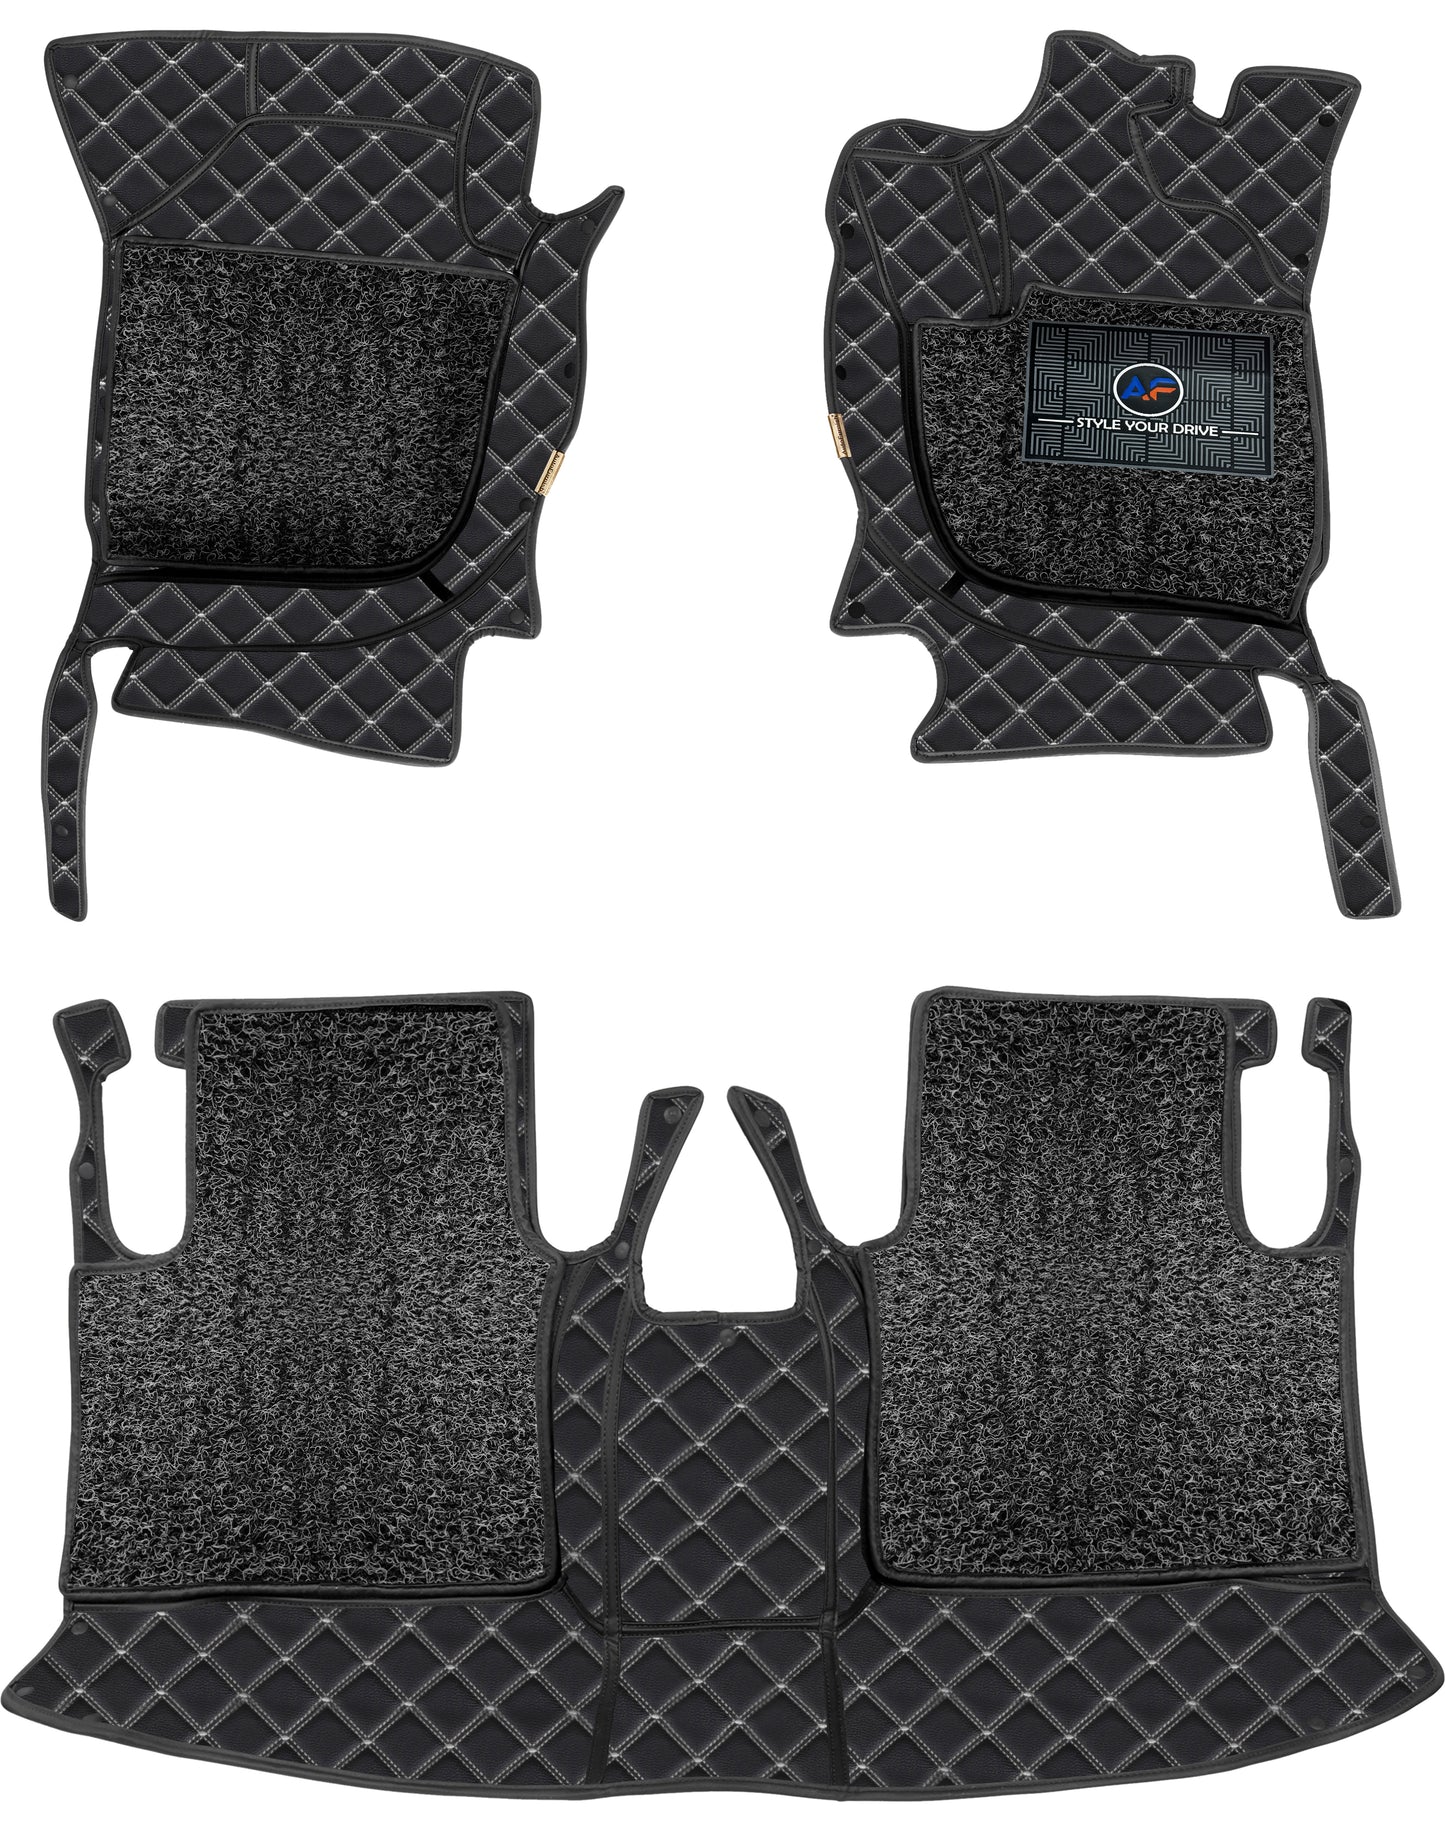 Mercedes S580 Maybach (2020-22)-7D Luxury Car Mat, All Weather Proof, Anti-Skid, 100% Waterproof & Odorless with Unique Diamond Fish Design (24mm Luxury PU Leather, 2 Rows)